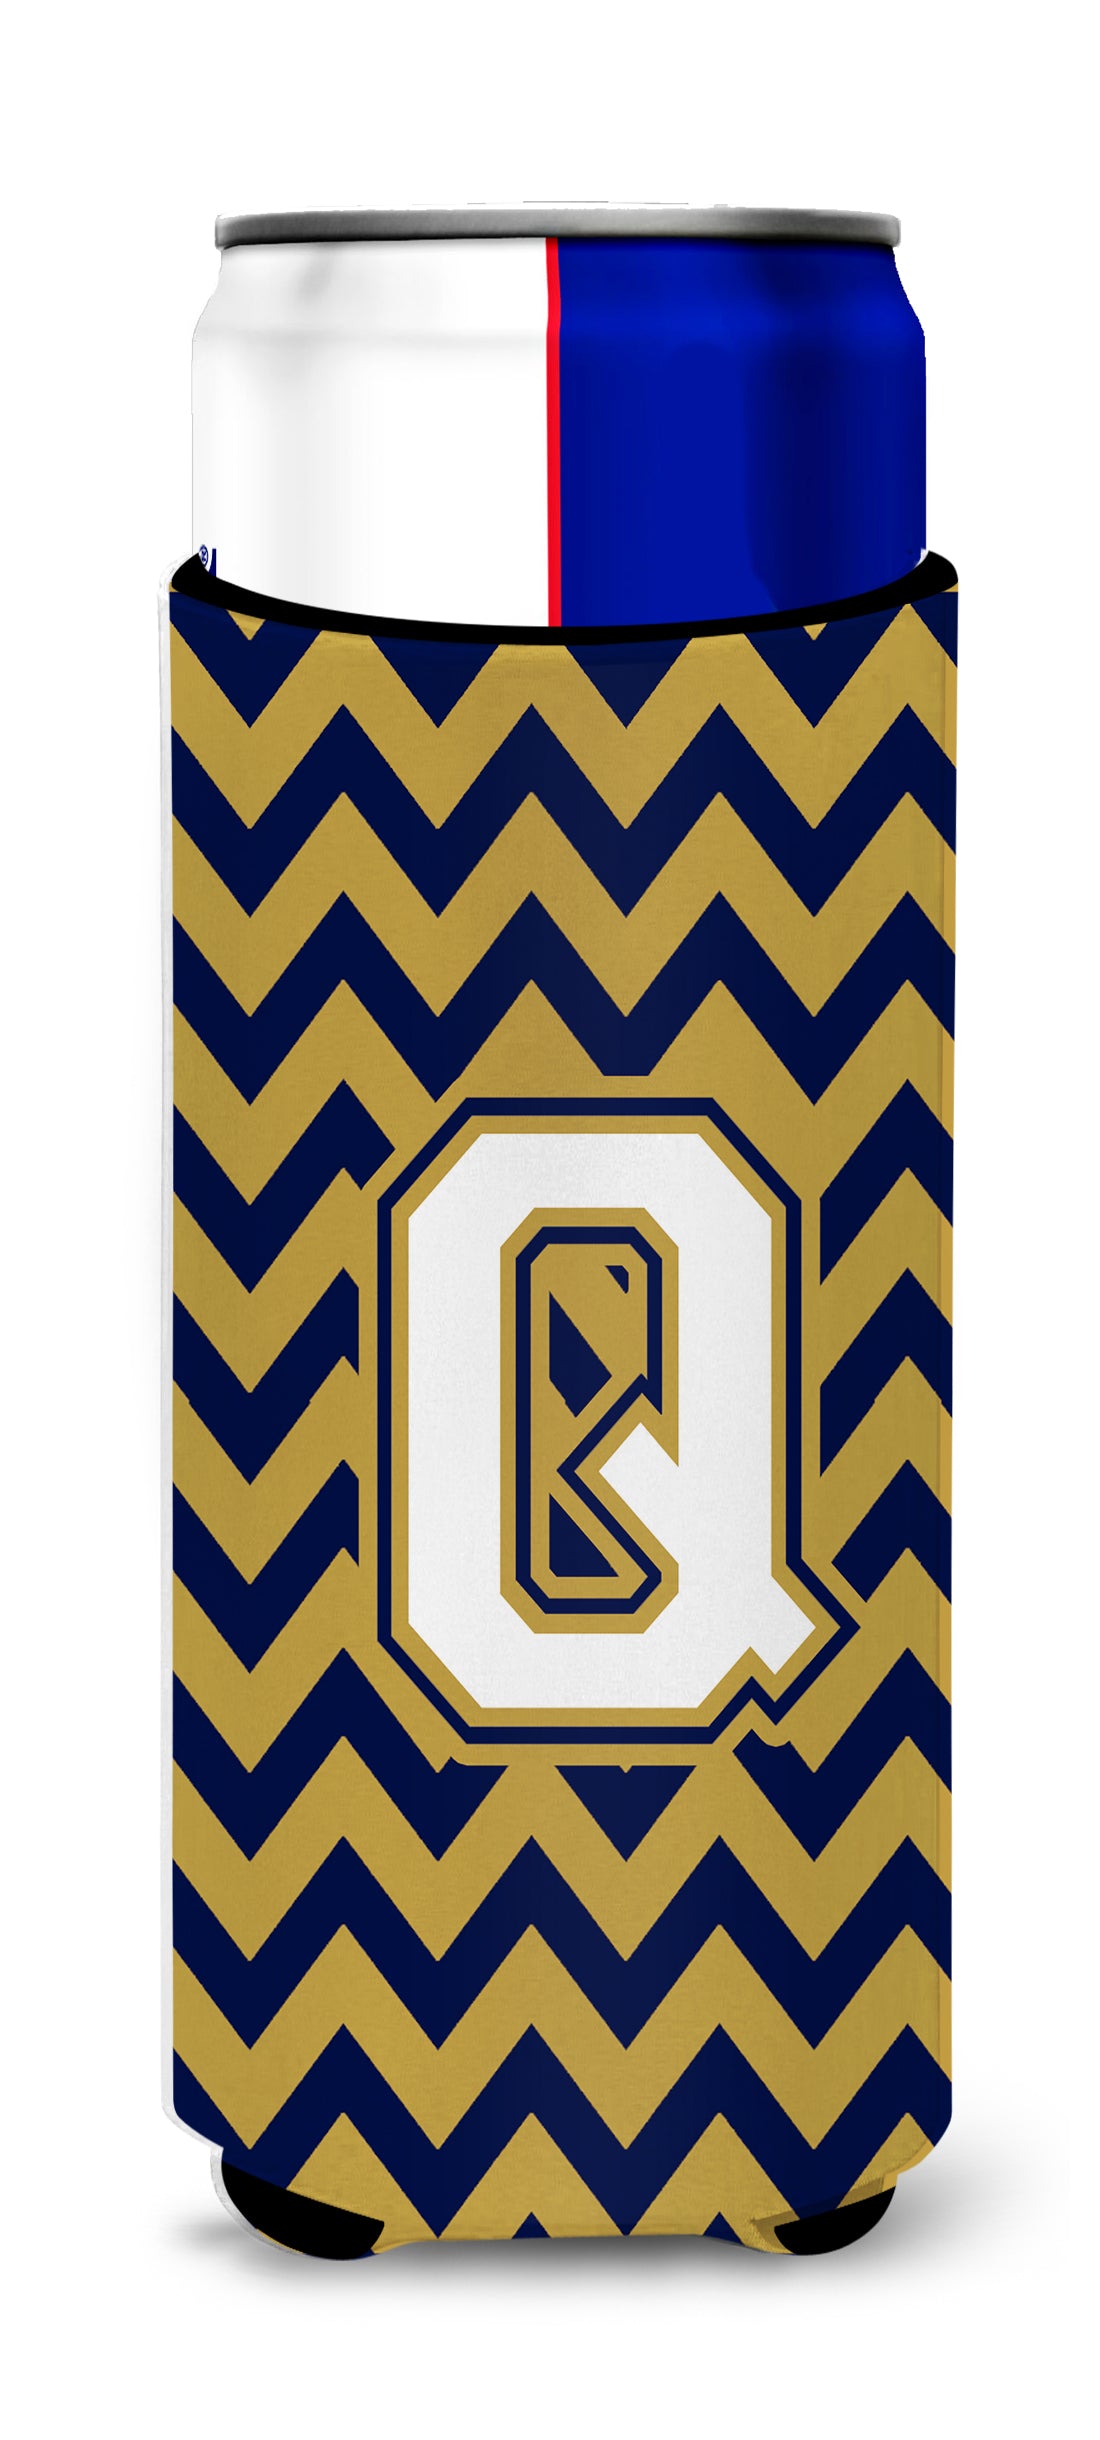 Letter Q Chevron Navy Blue and Gold Ultra Beverage Insulators for slim cans CJ1057-QMUK.